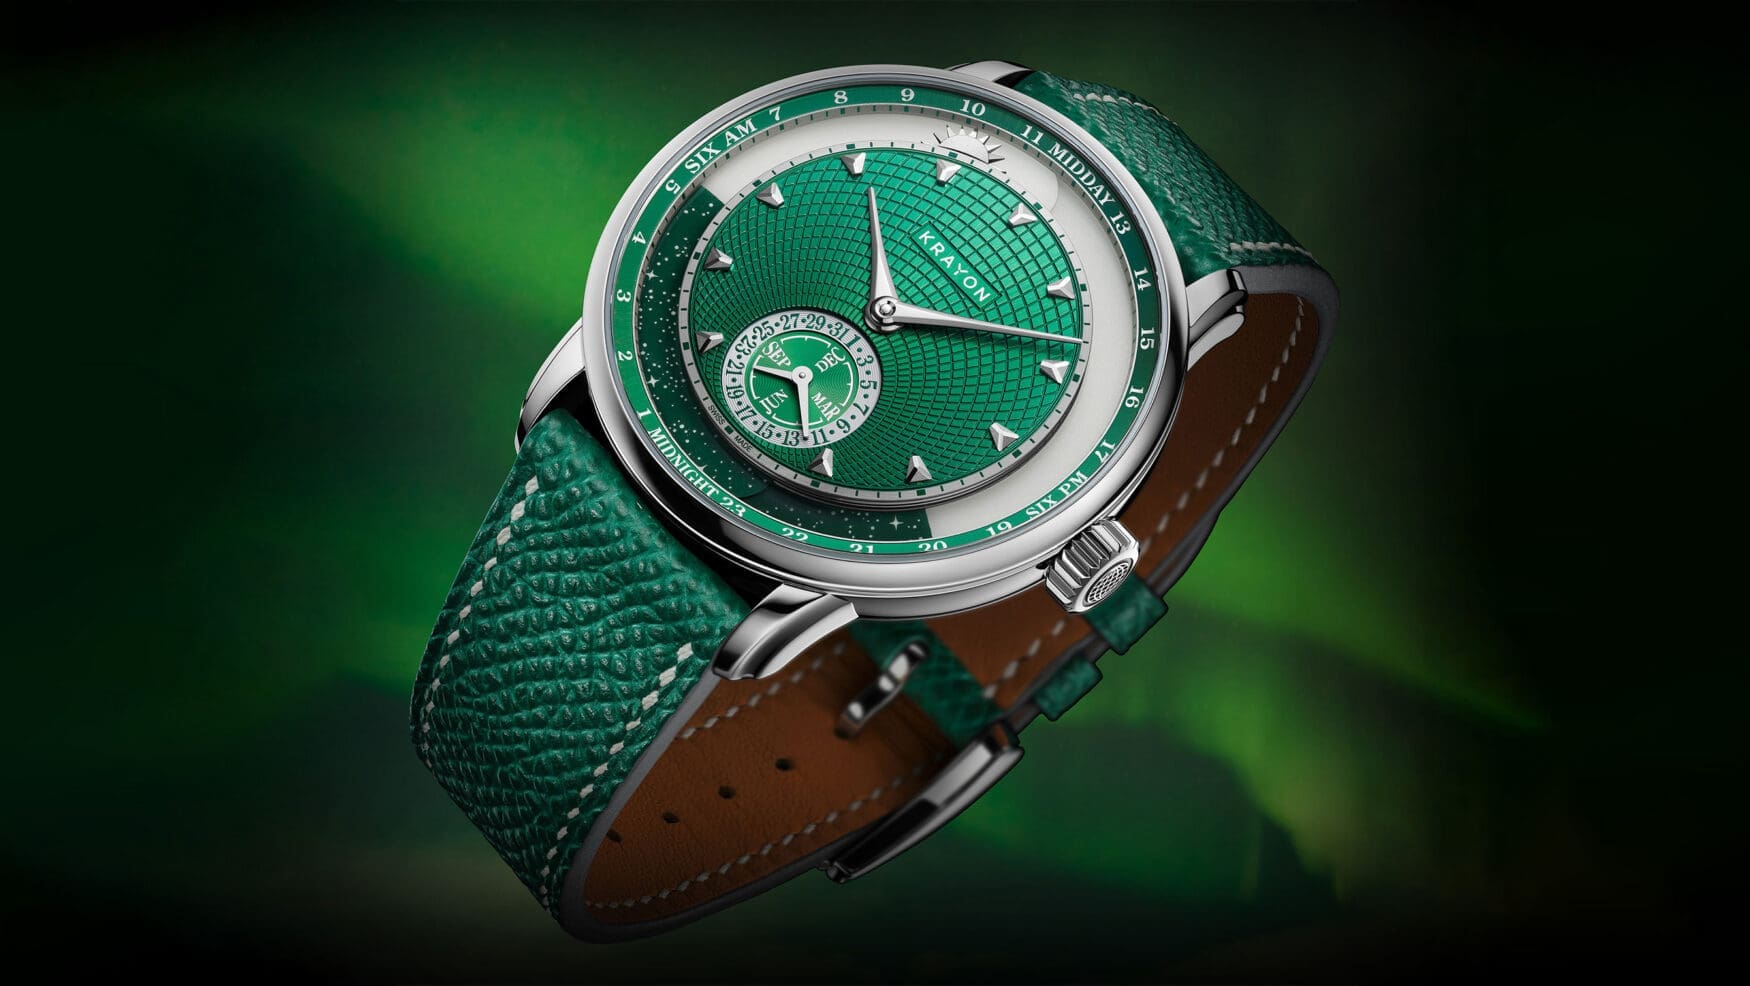 New releases from Studio Underd0g, Parmigiani Fleurier, Krayon and more